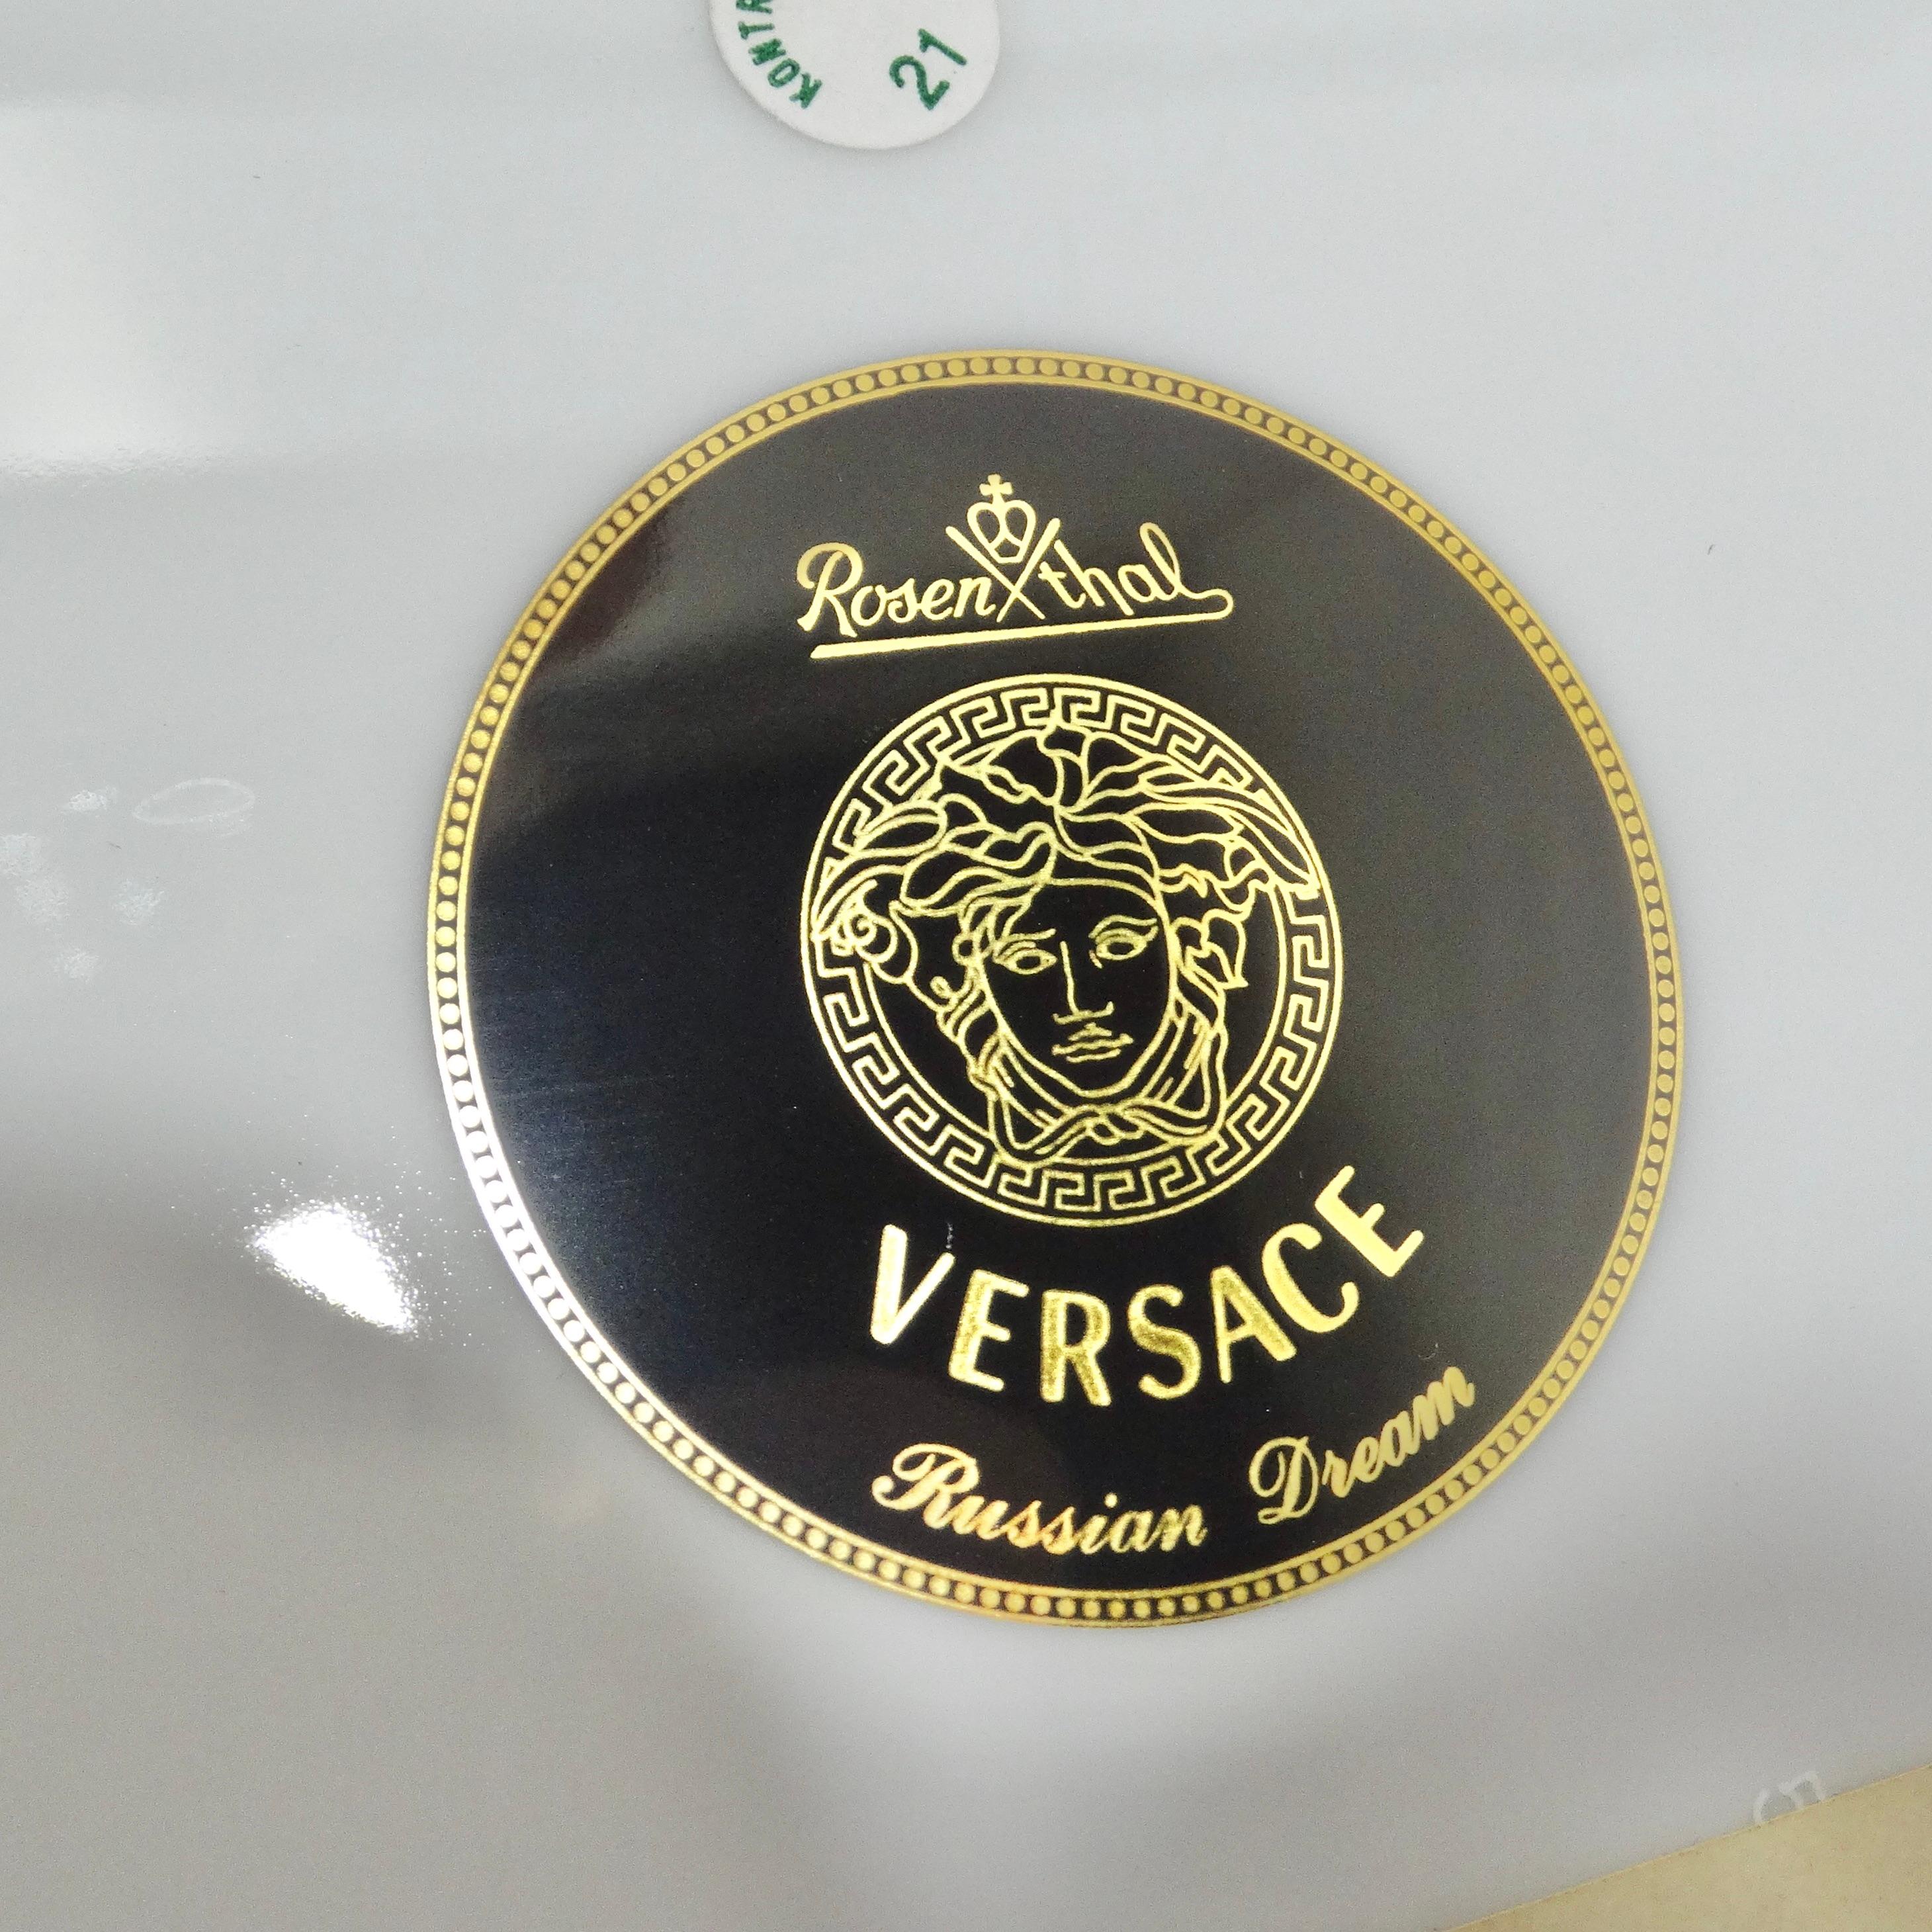 Versace Rosenthal 1990s Russian Dream Porcelain Plate For Sale 2